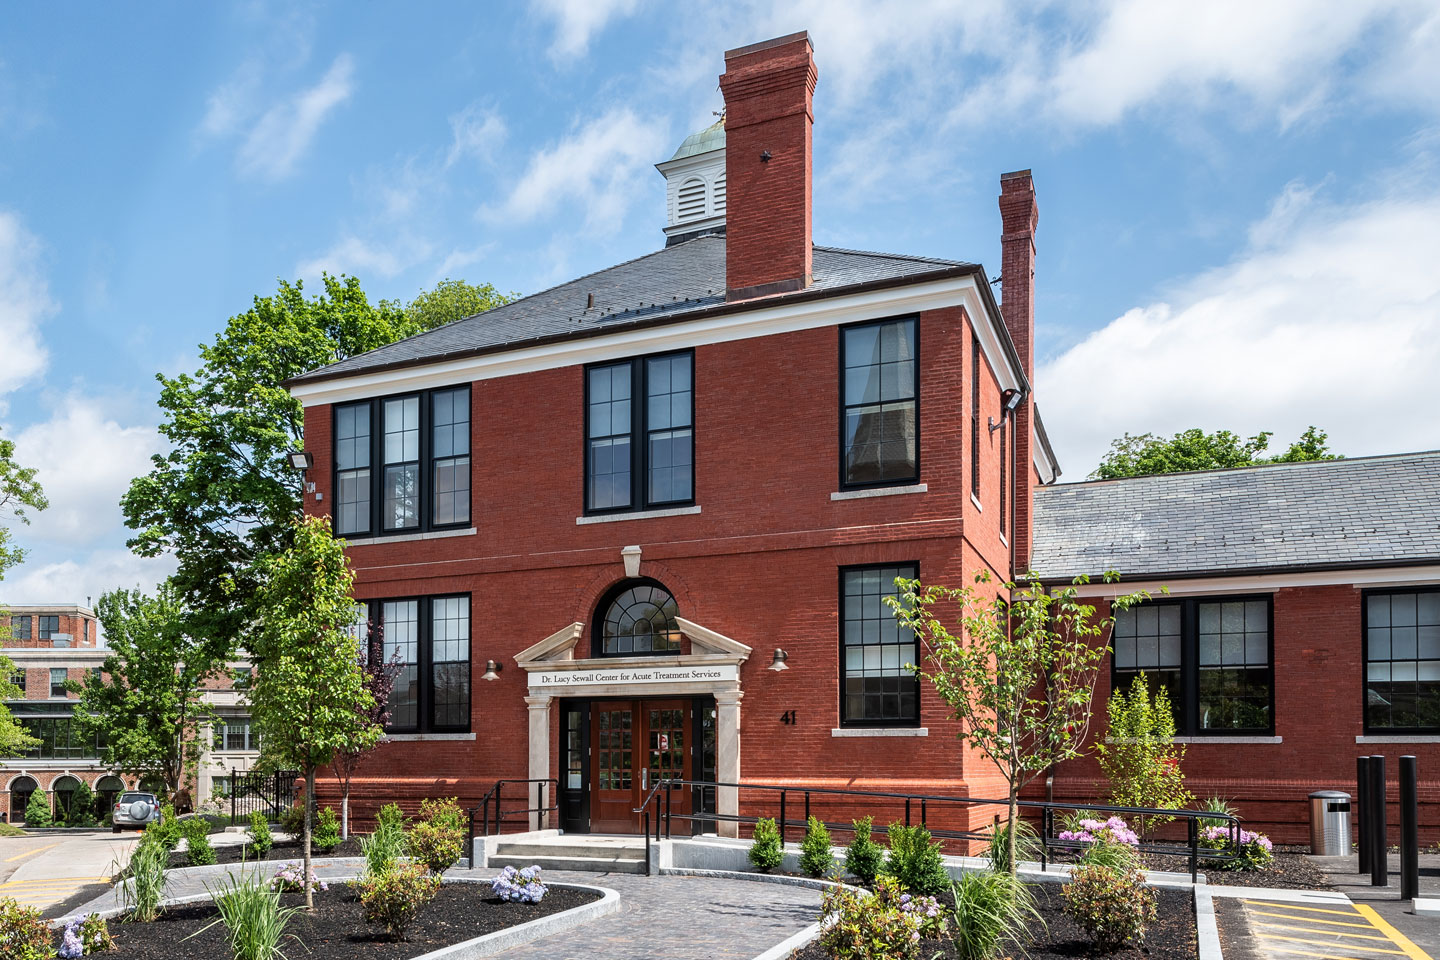 Timberline Construction Completes Dr Lucy Sewall Center For Acute Treatment Services Historic Renovation Project At The Dimock Center - Timberline Construction